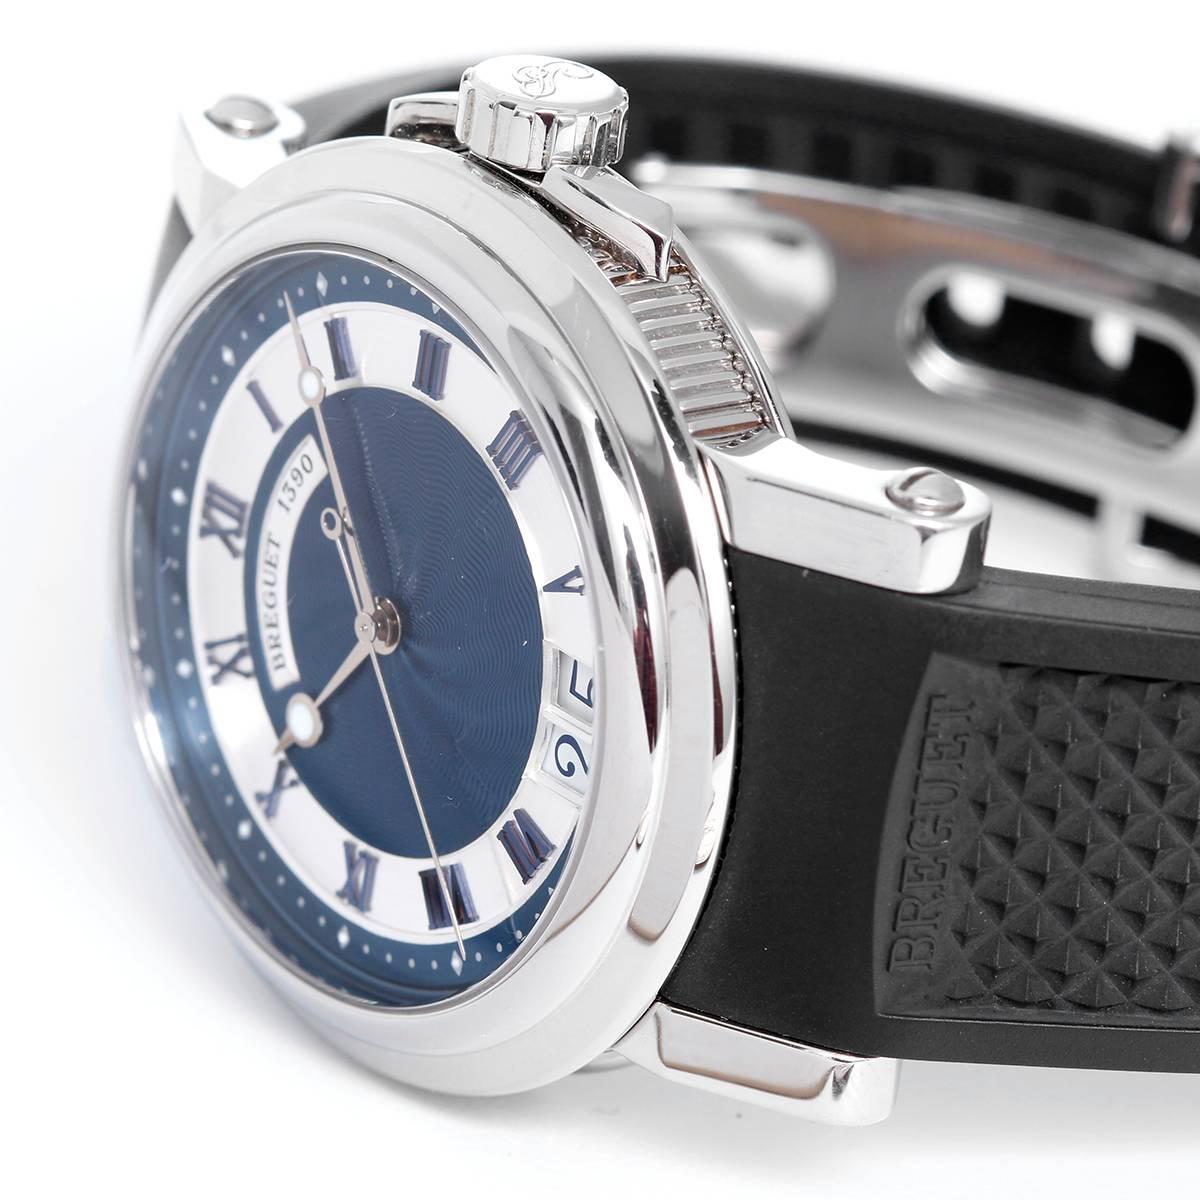 Breguet Marine Automatic Men's Watch Ref. 5817 -  Automatic Winding. Stainless Steel with fixed bezel; Crystal display back (39 mm). Blue Guilloche with silver hands and blue roman numerals dial; Big Date  at 6 o'clock. Black rubber strap with